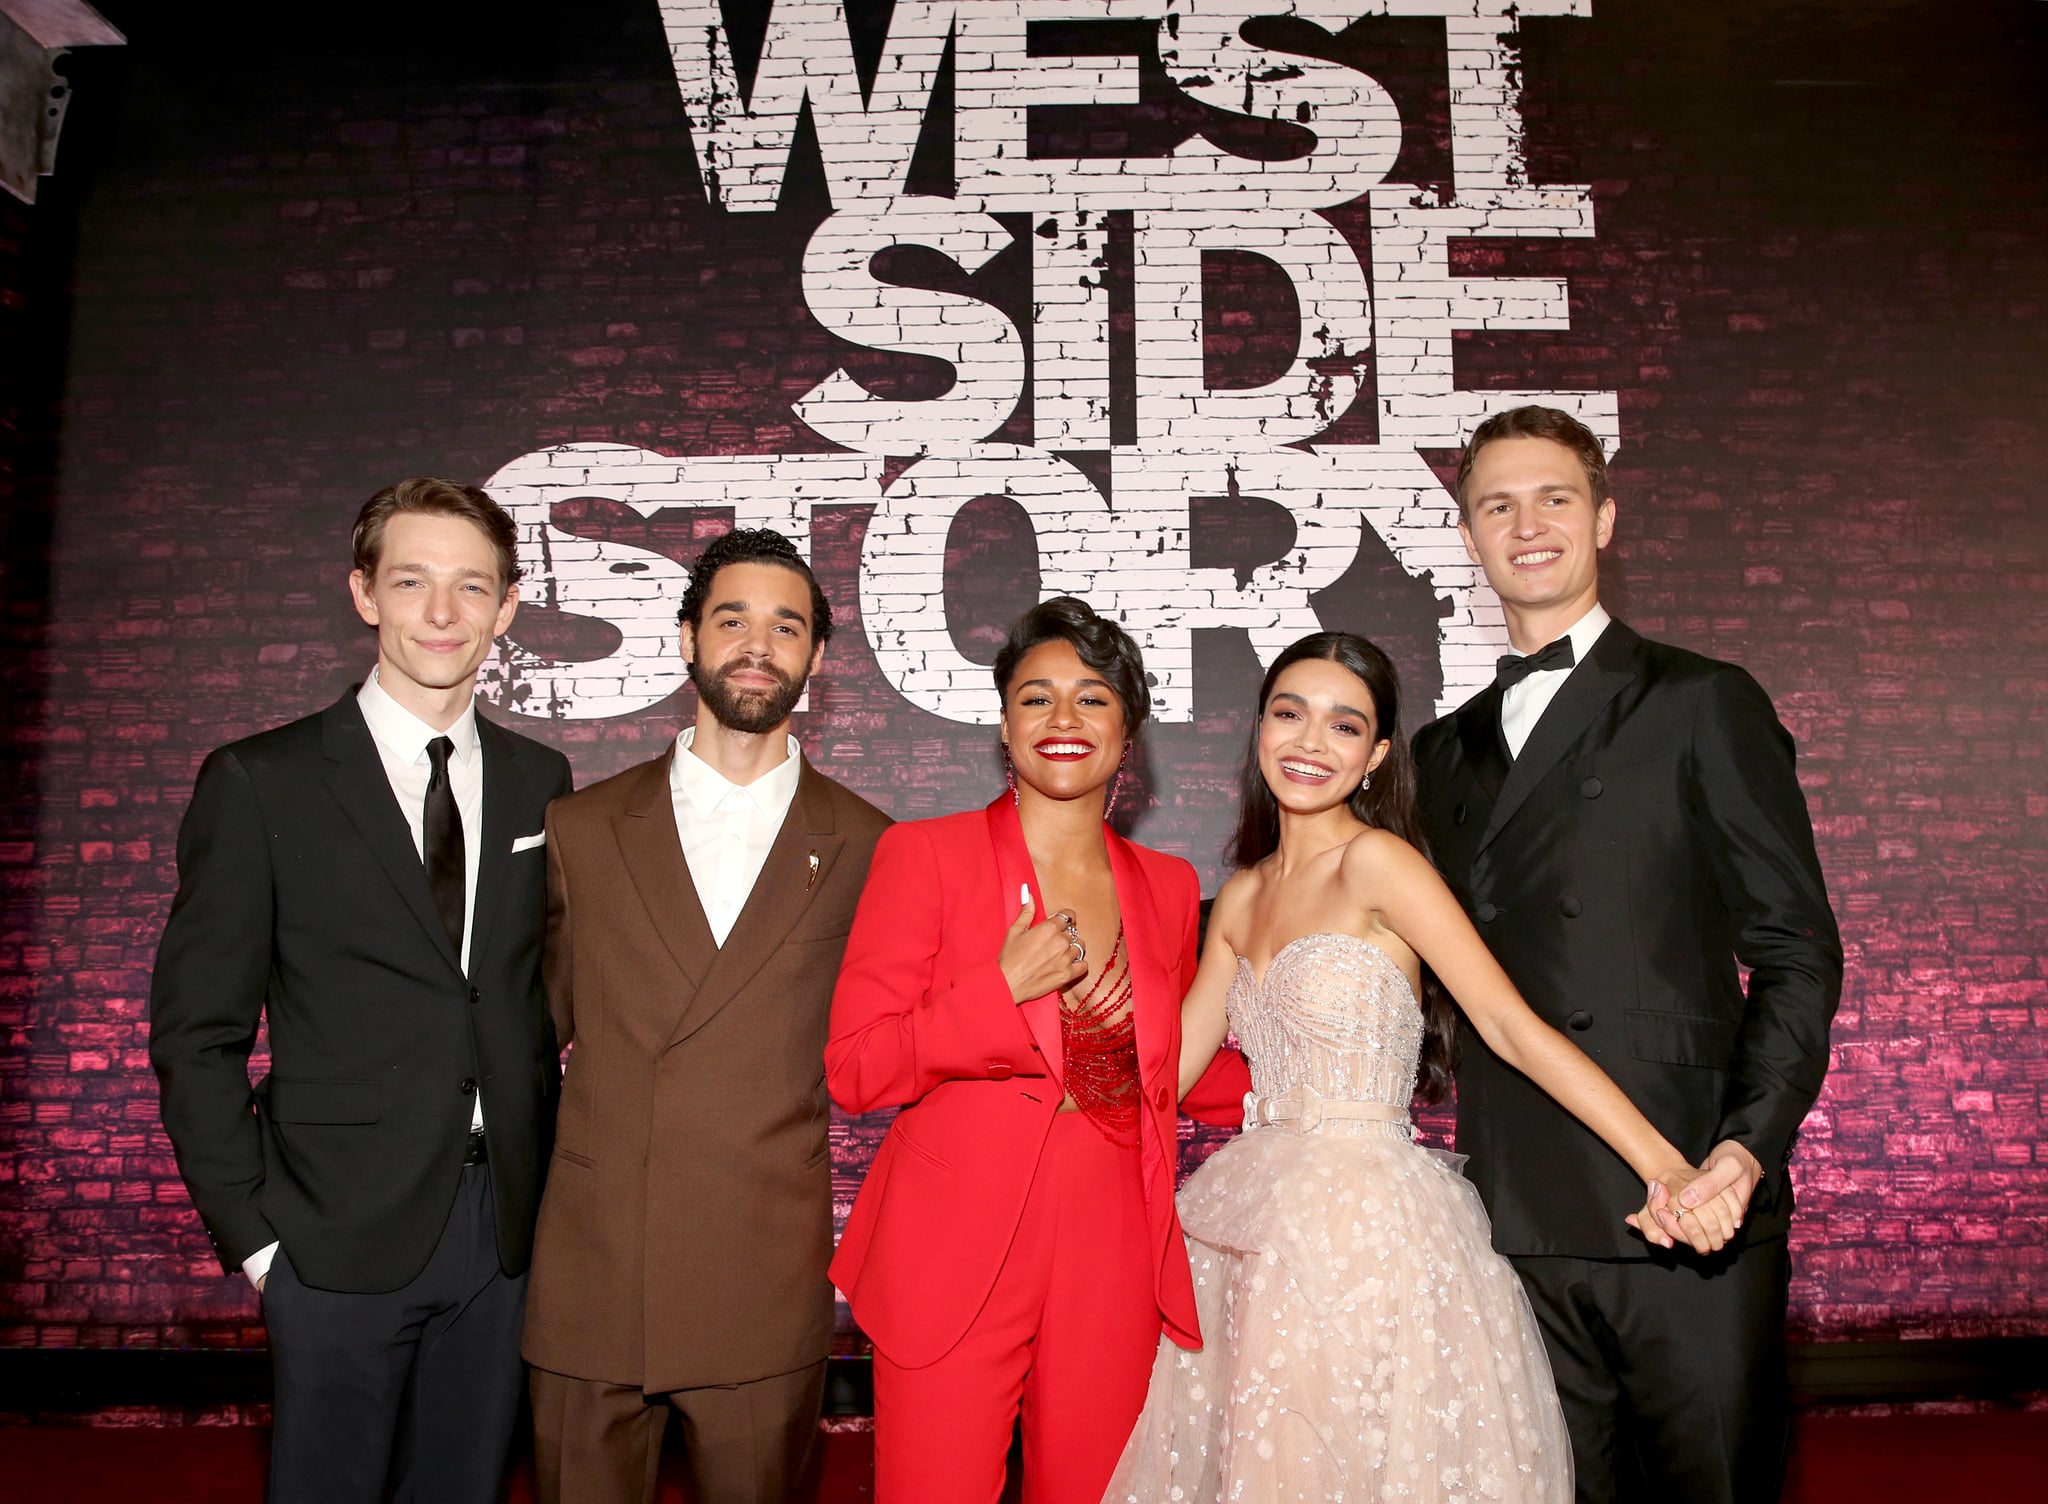 LOS ANGELES, CALIFORNIA - DECEMBER 07: (L-R) Mike Faist, David Alvarez, Ariana DeBose, Rachel Zegler and Ansel Elgort attend the Los Angeles premiere of West Side Story, held at the El Capitan Theatre in Hollywood, California on December 07, 2021. (Photo by Jesse Grant/Getty Images for 20th Century Studios)